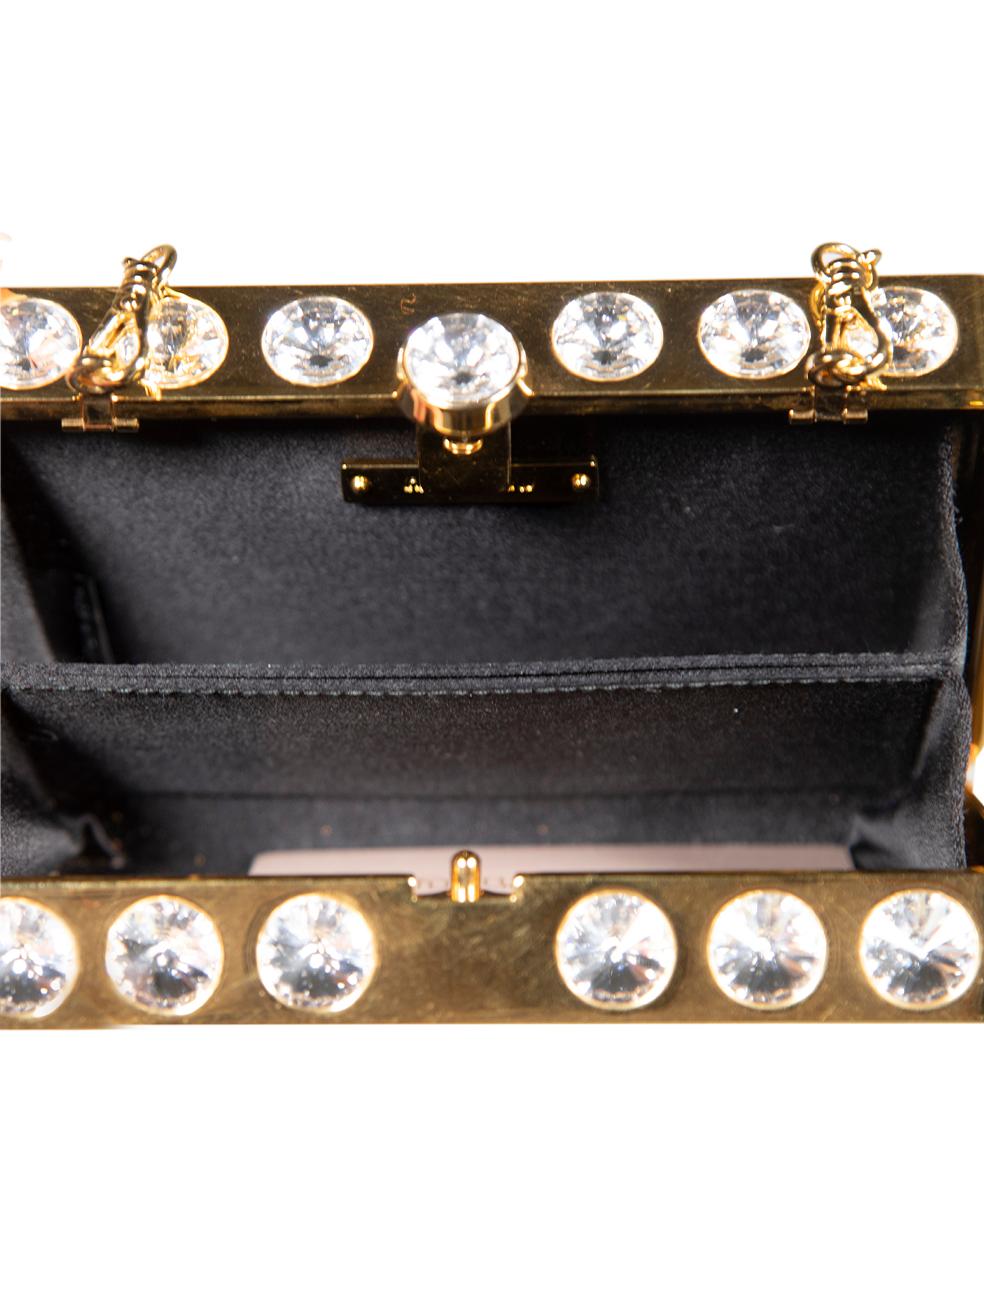 Miu Miu Gold Embellished Hard Clutch with Chain For Sale 1